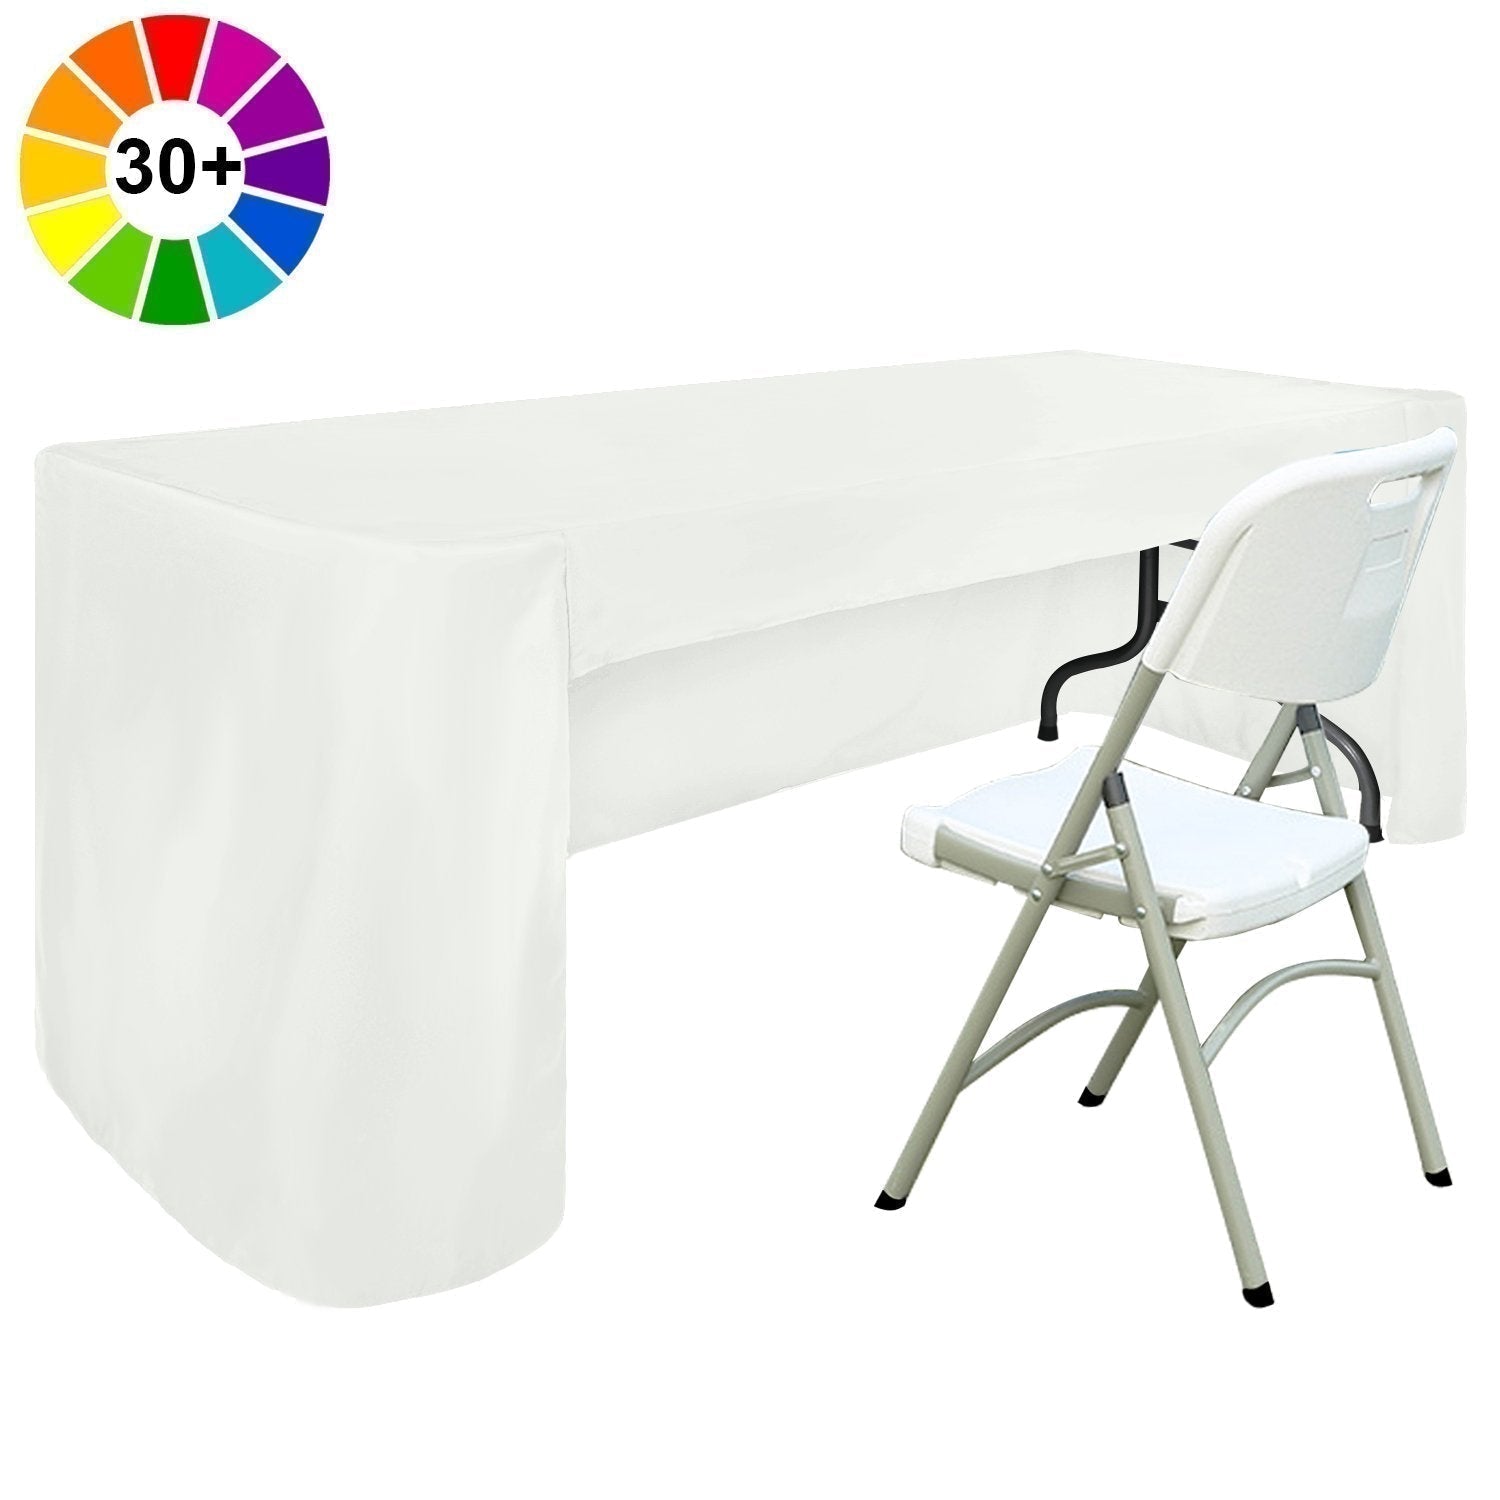 3 Sided Convertible Table Cover